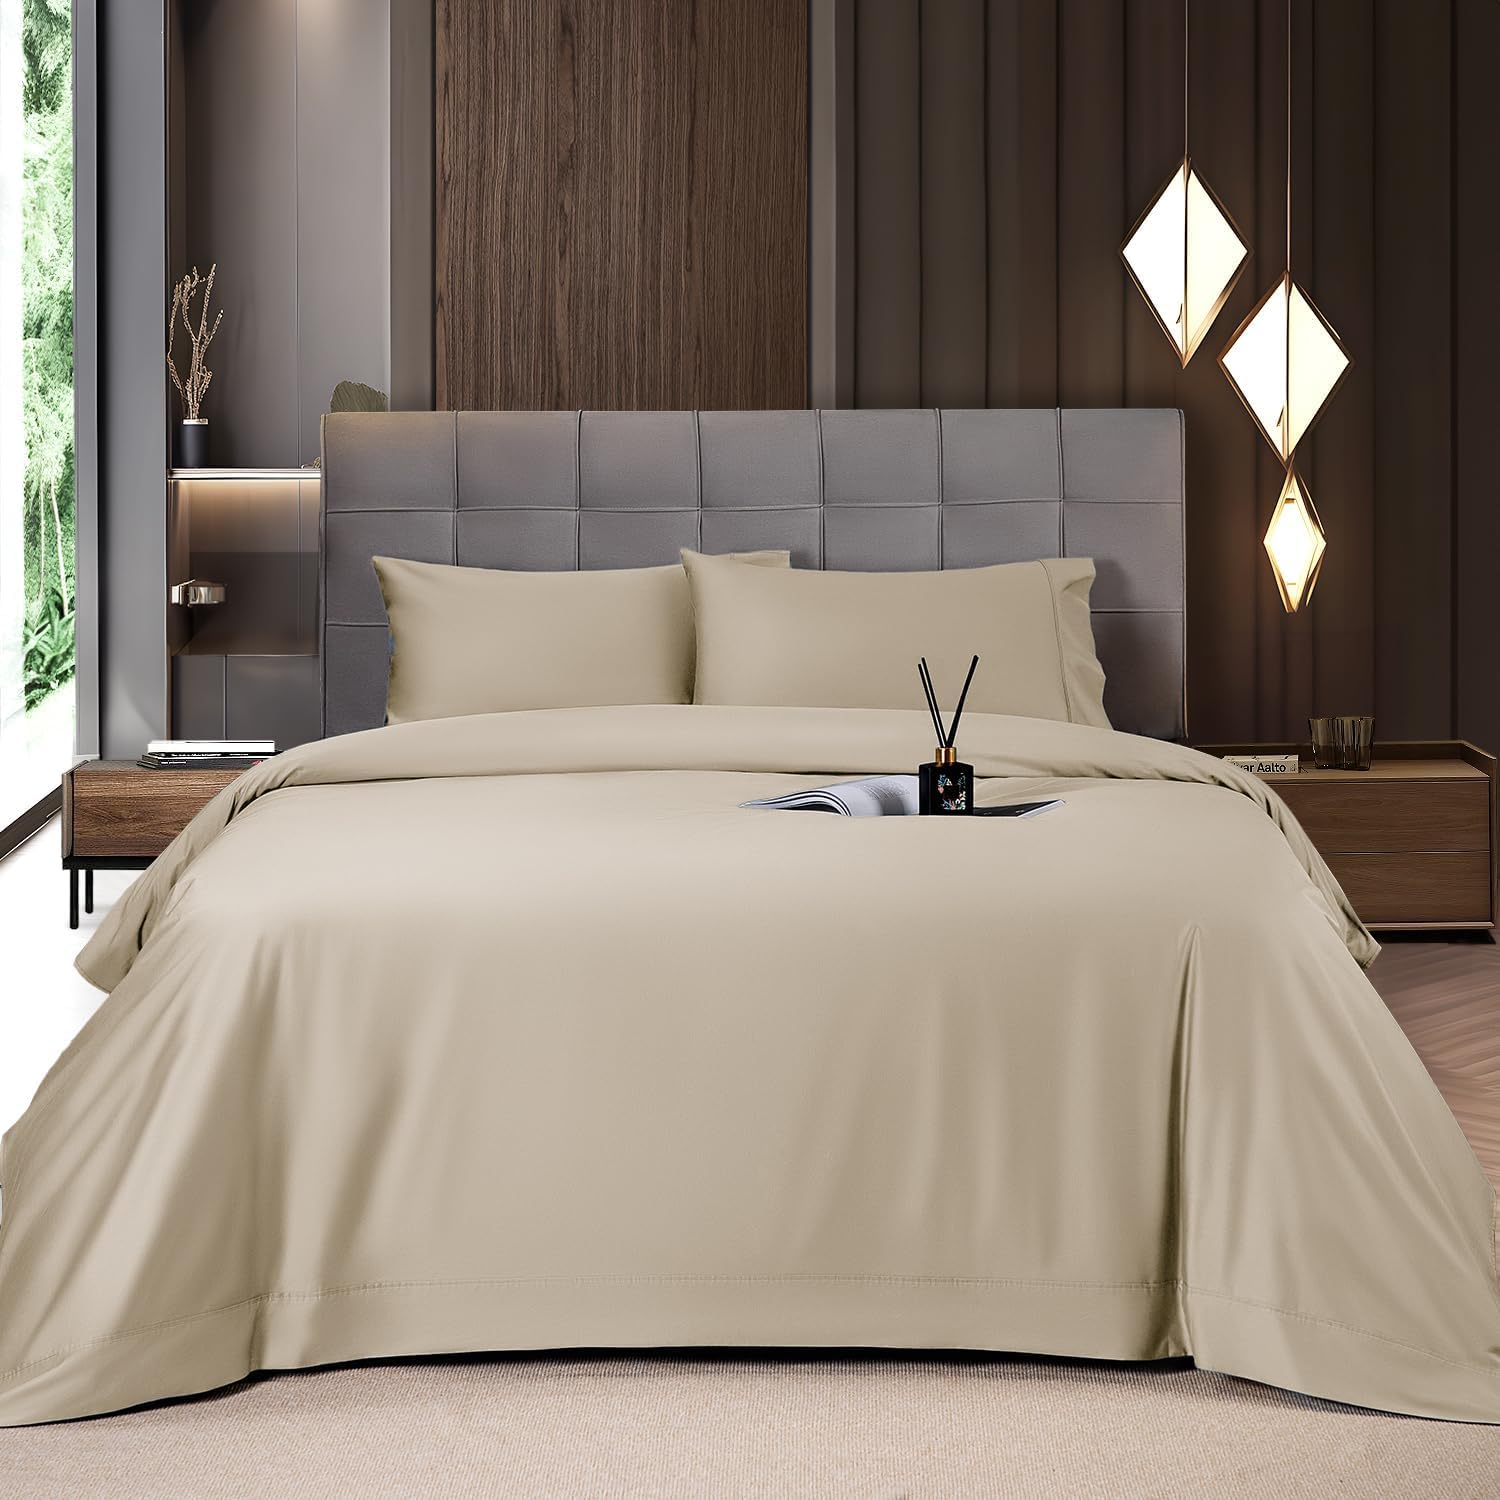 Mush 100% Bamboo Bedsheet for King Size Bed with 2 Pillow Covers | Luxuriously Soft, Breathable and Naturally Anti Microbial Thermoregulating Bed Sheet 400TC (Royal Beige)